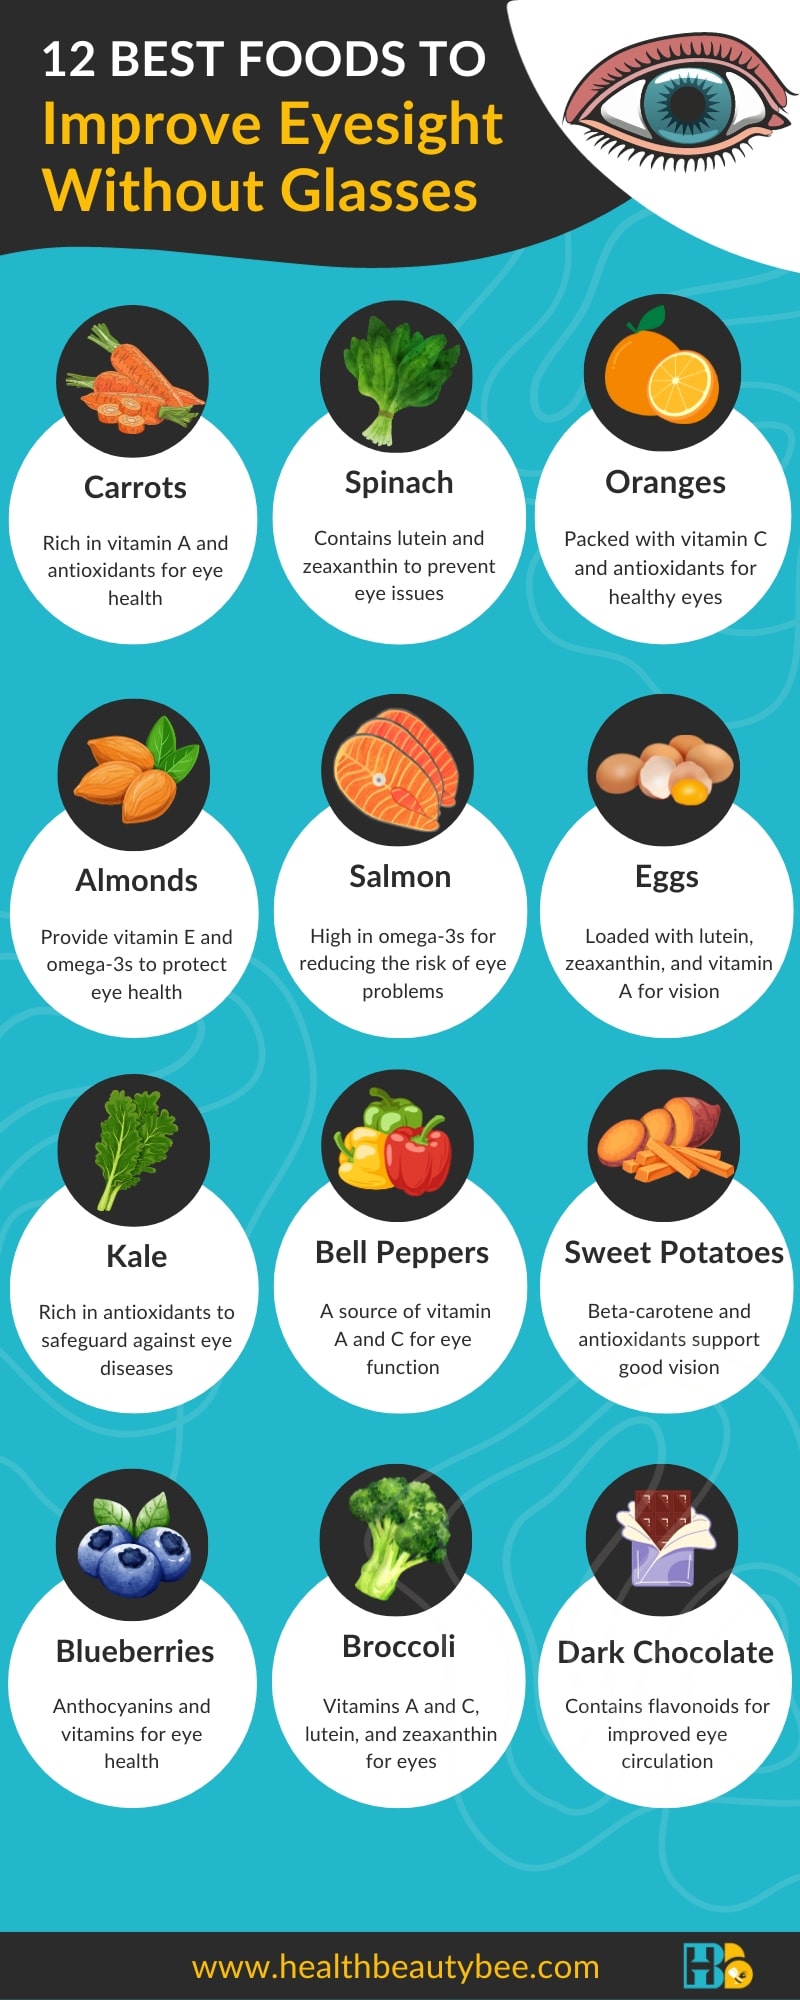 12 Best Foods to Improve Eyesight Without Glasses infographic healthbeautybee